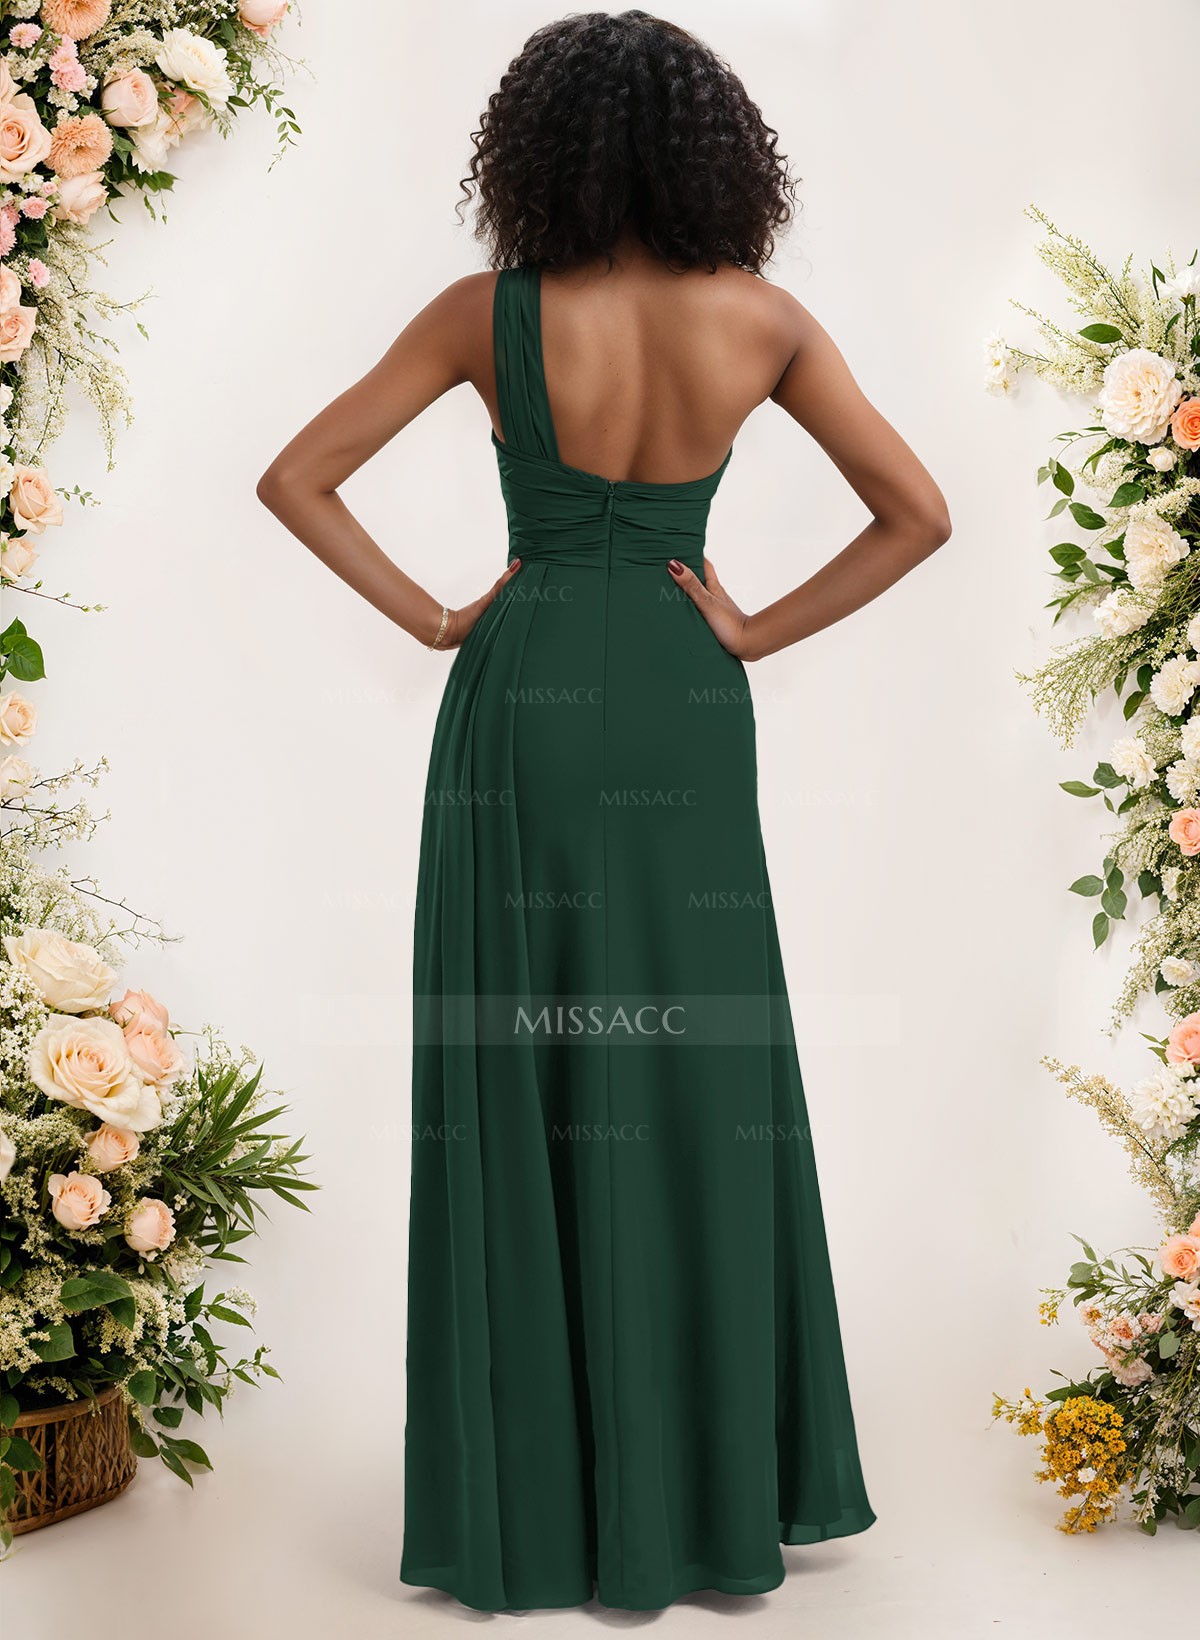 A-Line One-Shoulder Sleeveless Chiffon Bridesmaid Dresses With High Split